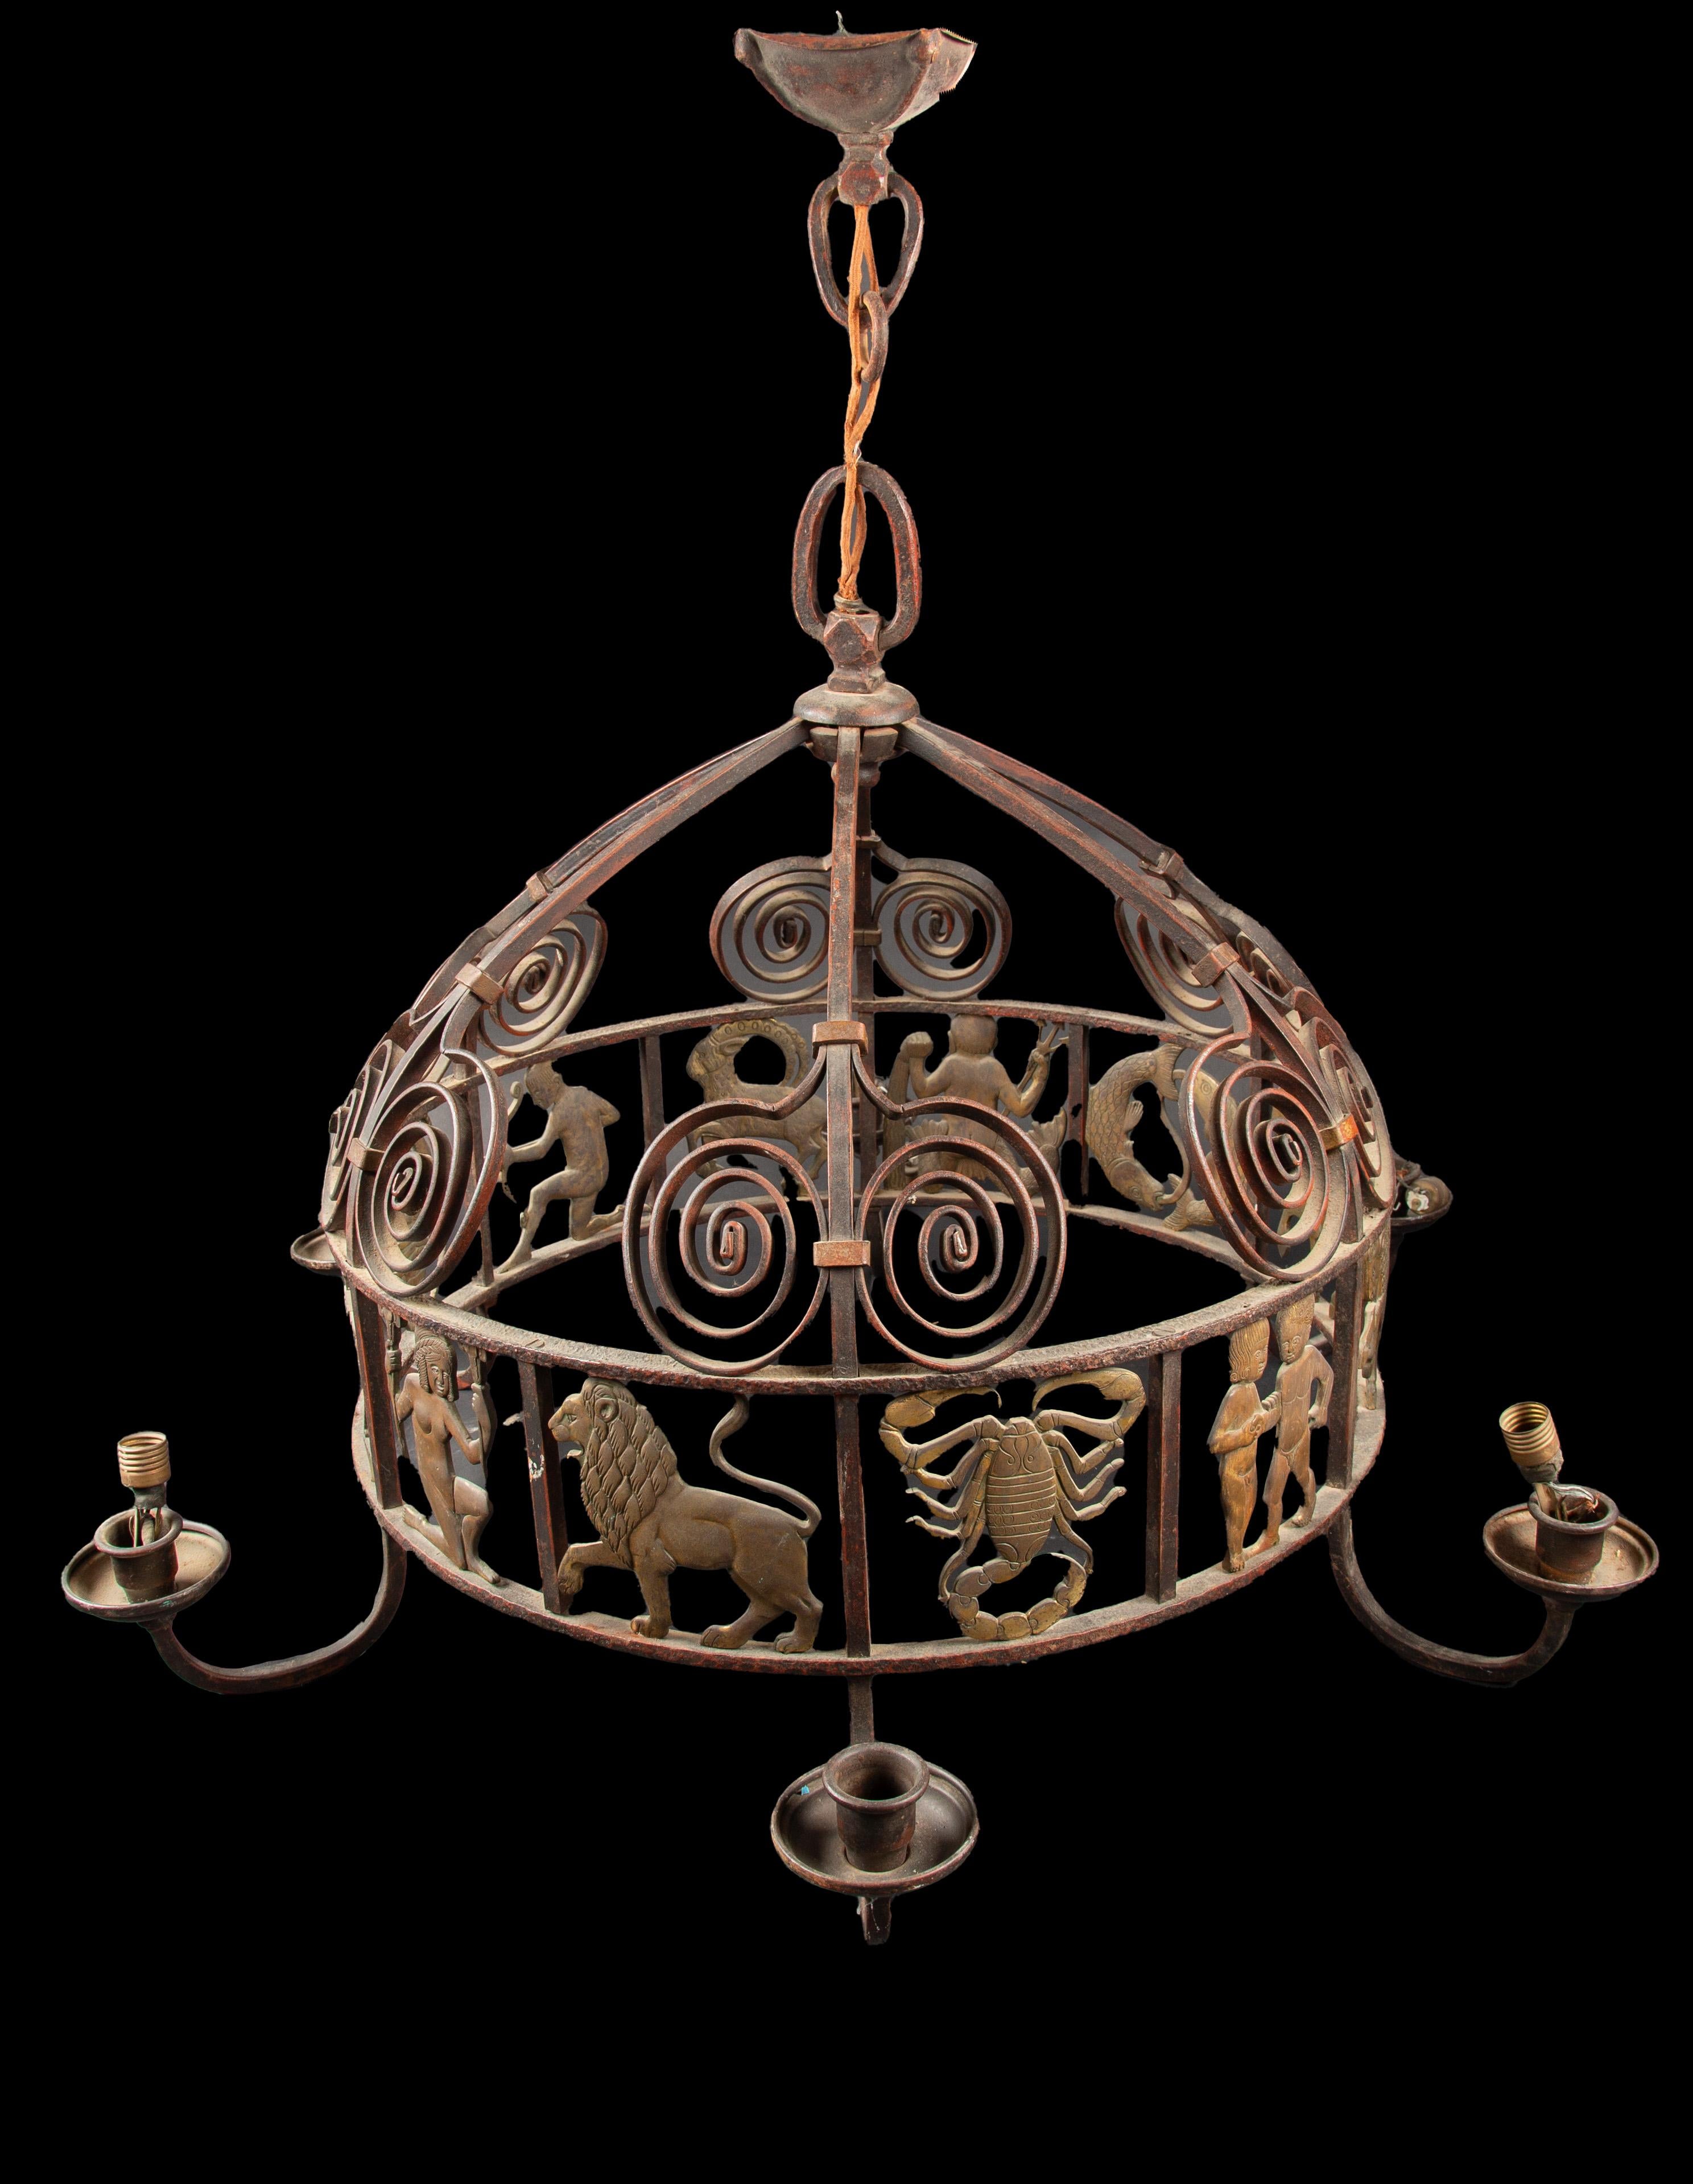 An exquisite large one of a kind  French High Art Deco chandelier—a true masterpiece of craftsmanship. Crafted with meticulous attention to detail, this celestial-inspired light fixture showcases intricate ironwork that dances with elegance. Each